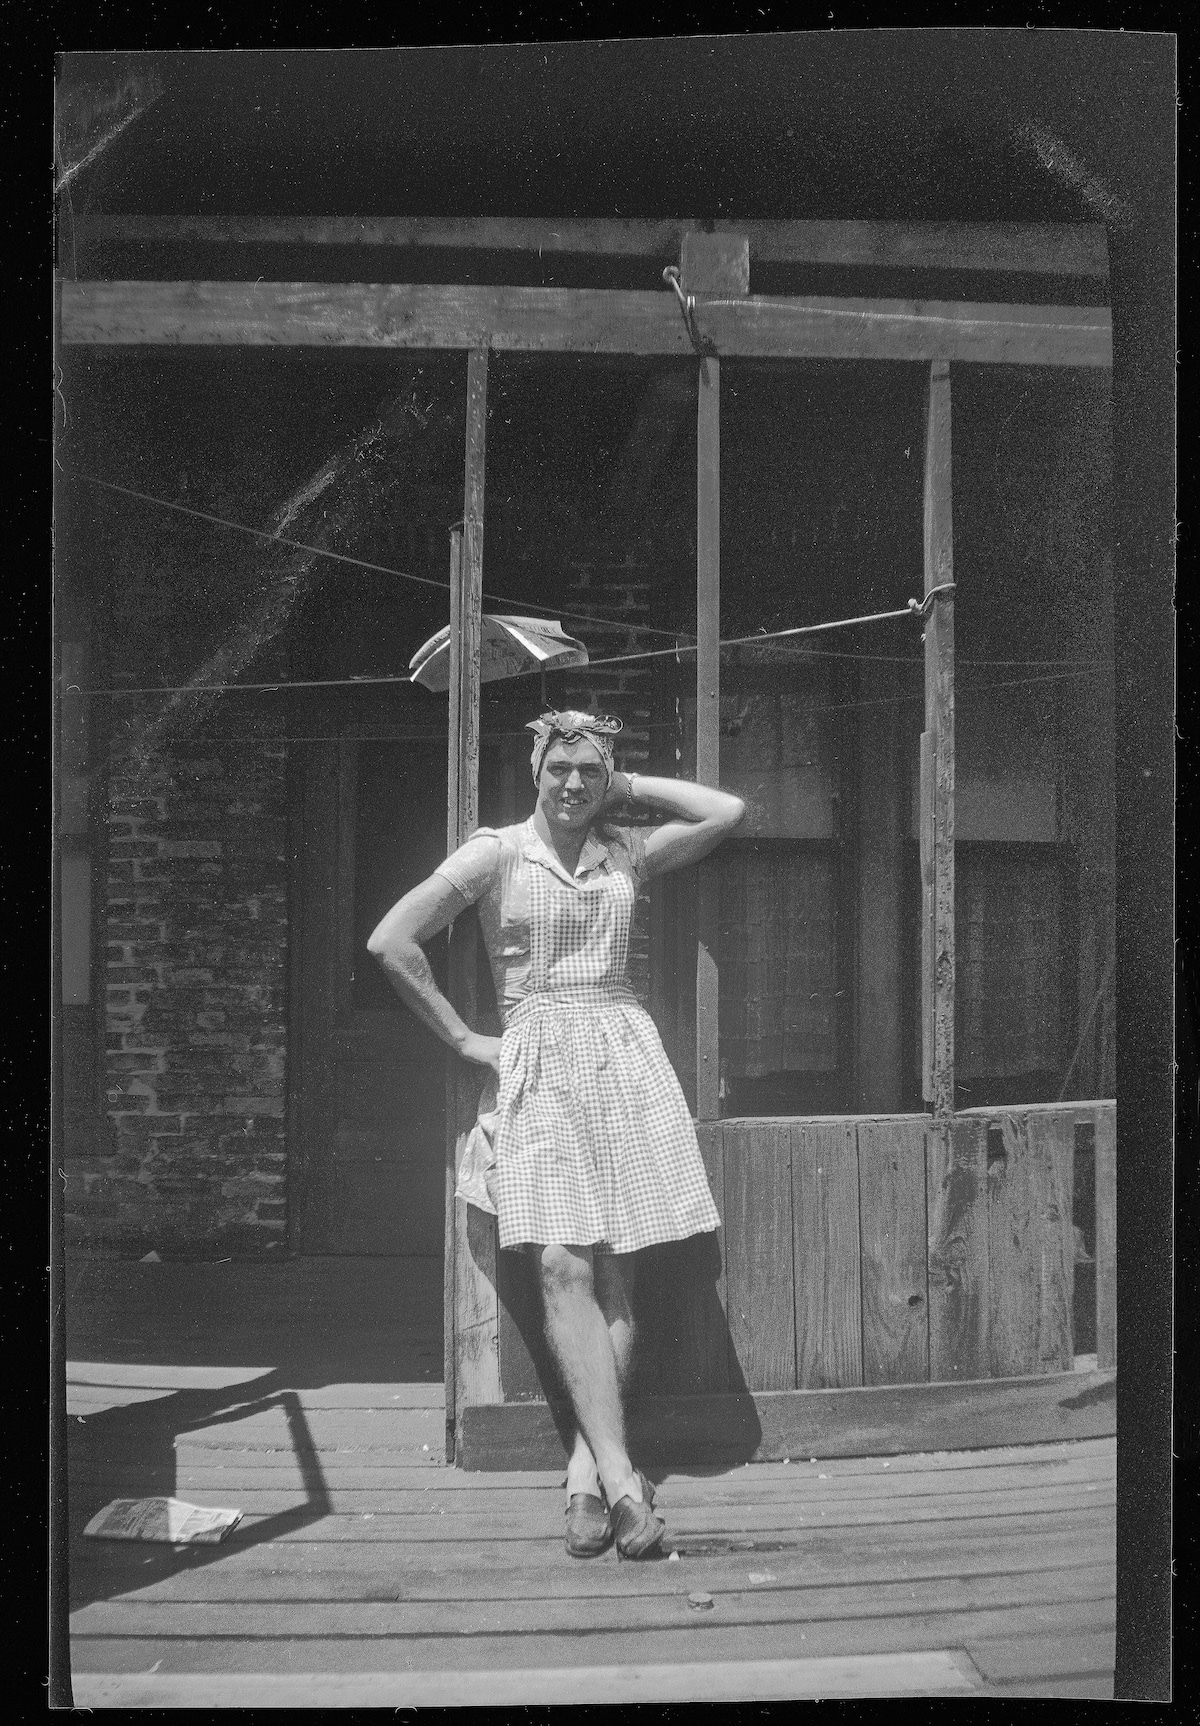 Vintage Photo of Man Dressed Up as a Woman